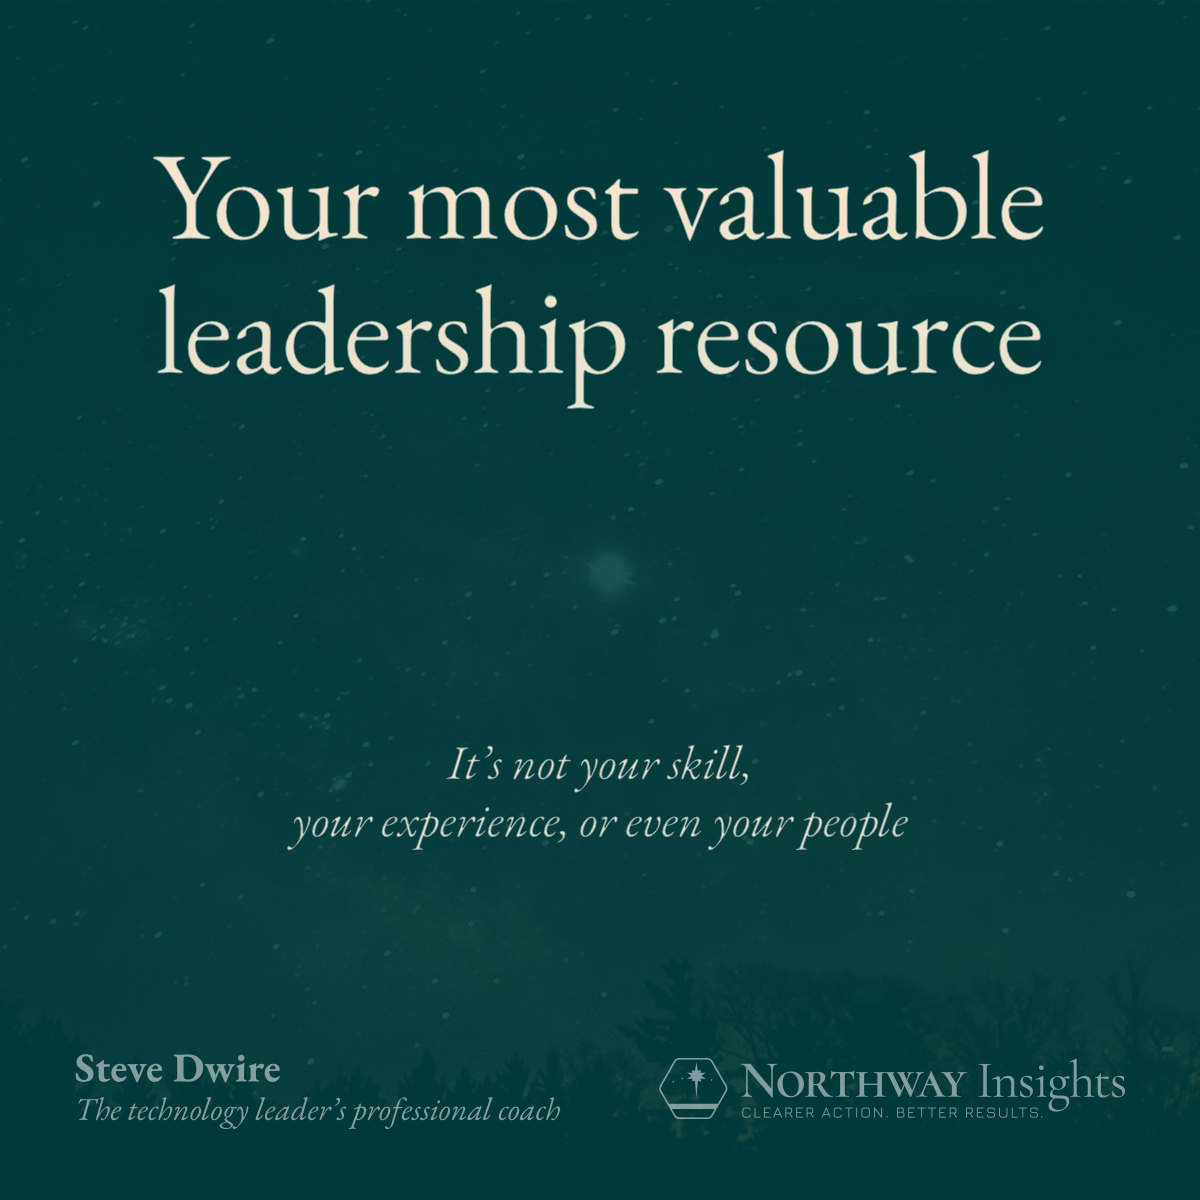 Your most valuable leadership resource